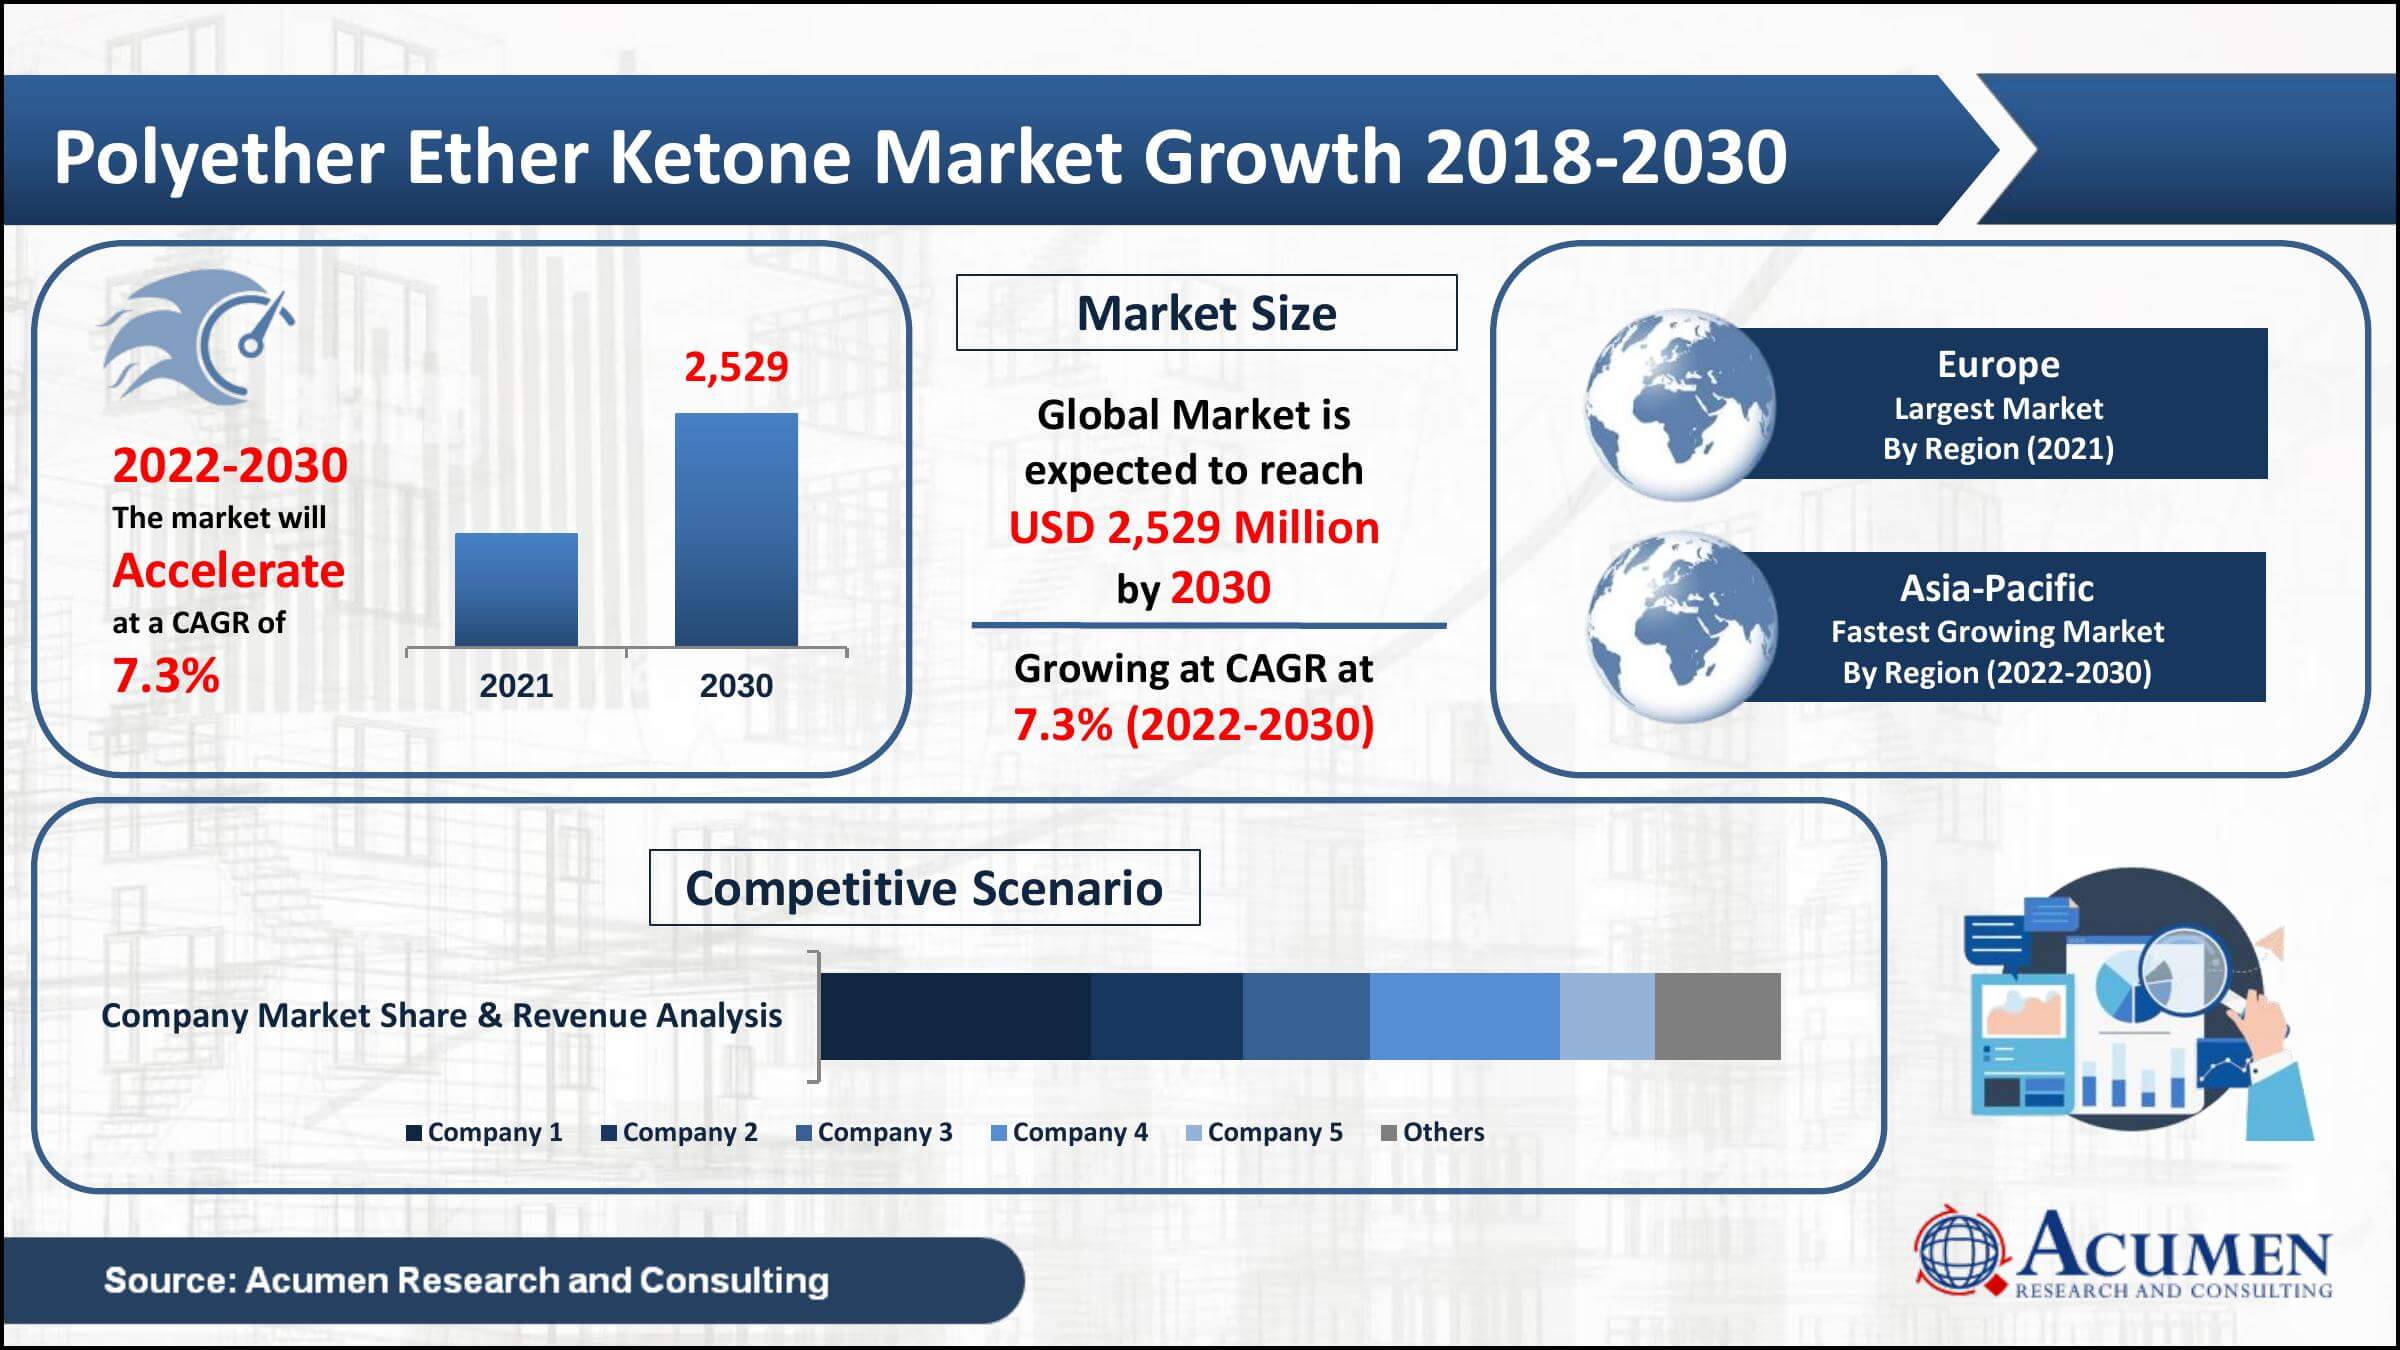 Global polyether ether ketone market value collected USD 1,367 Million in 2021, with a 7.3% CAGR between 2022 and 2030